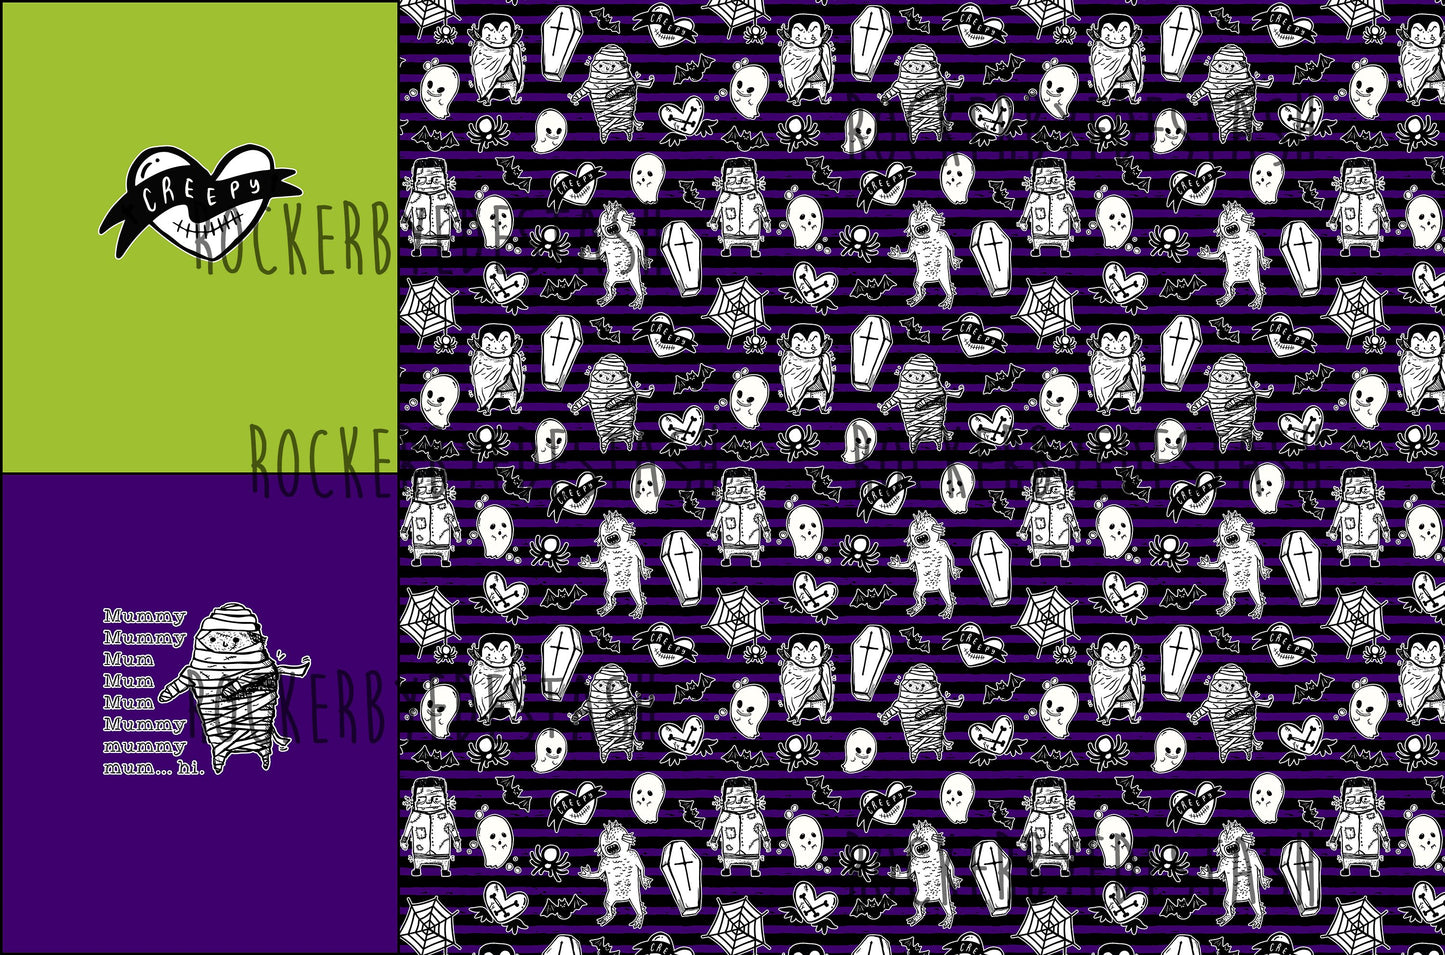 Cotton Woven - Round JJ Retail - Halloween Prints - Zombies, Bats, and more